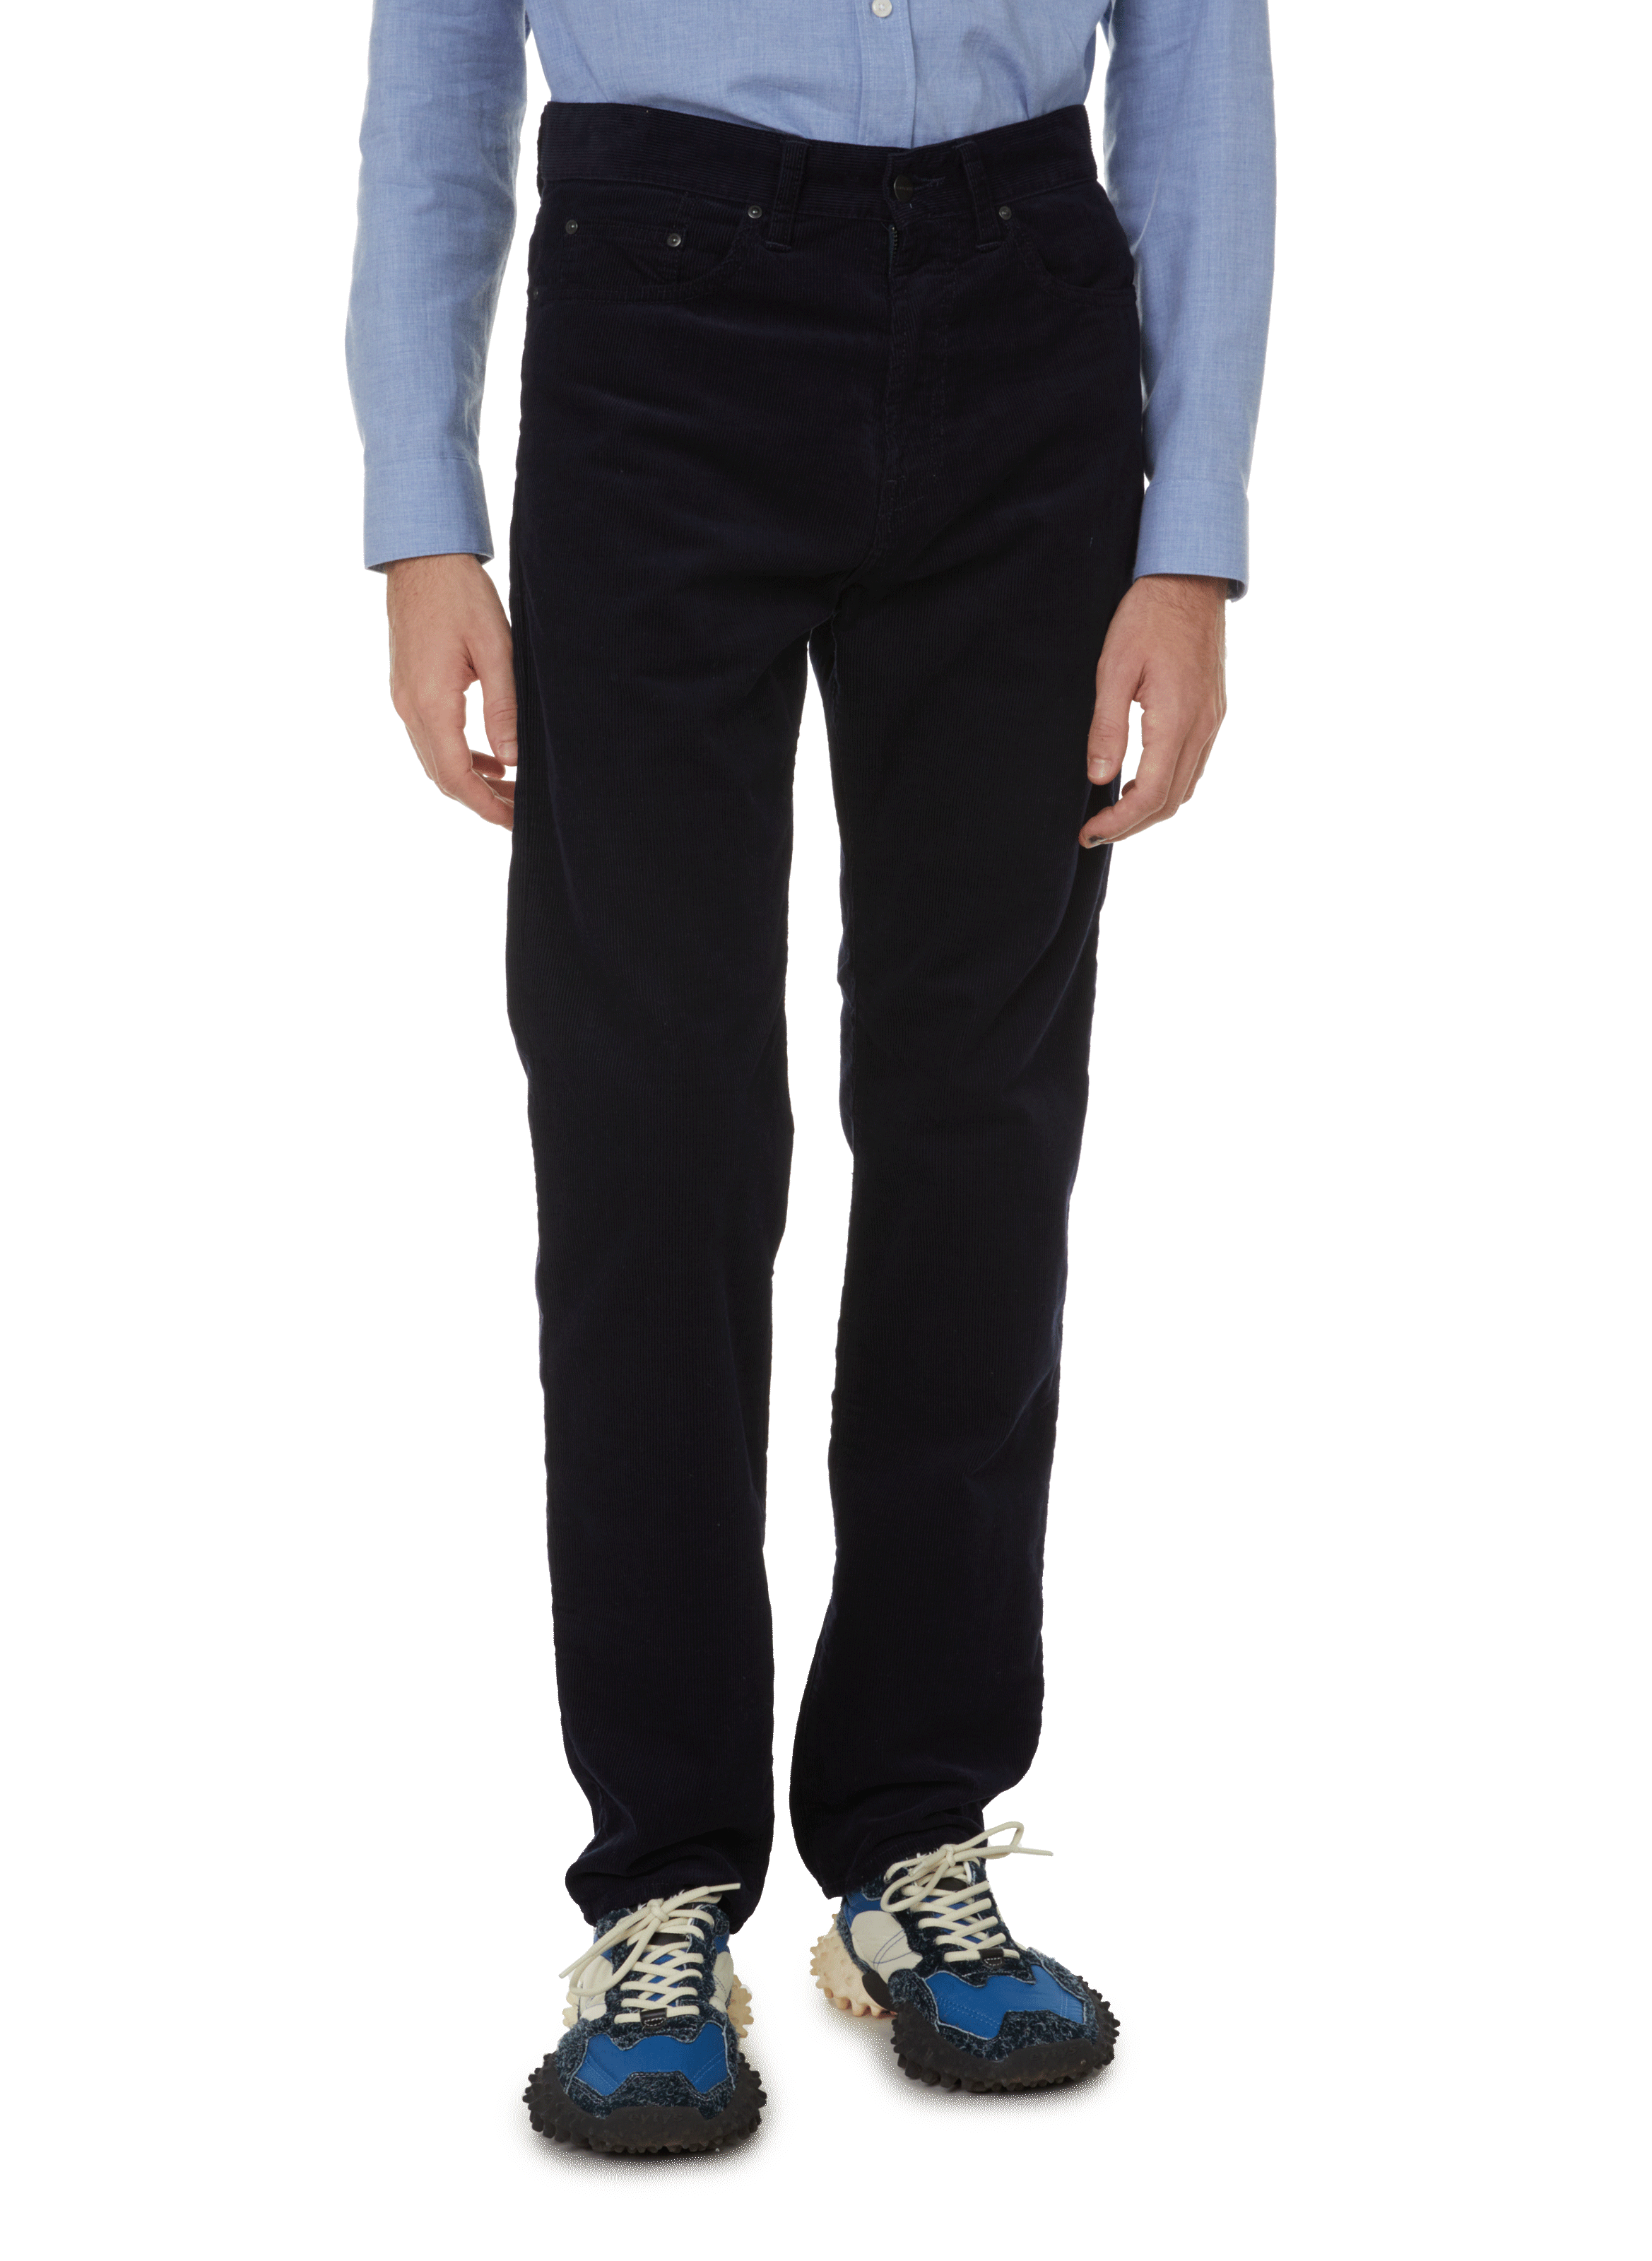 CARHARTT WIP Newel Tapered CottonCorduroy Trousers for Men  MR PORTER